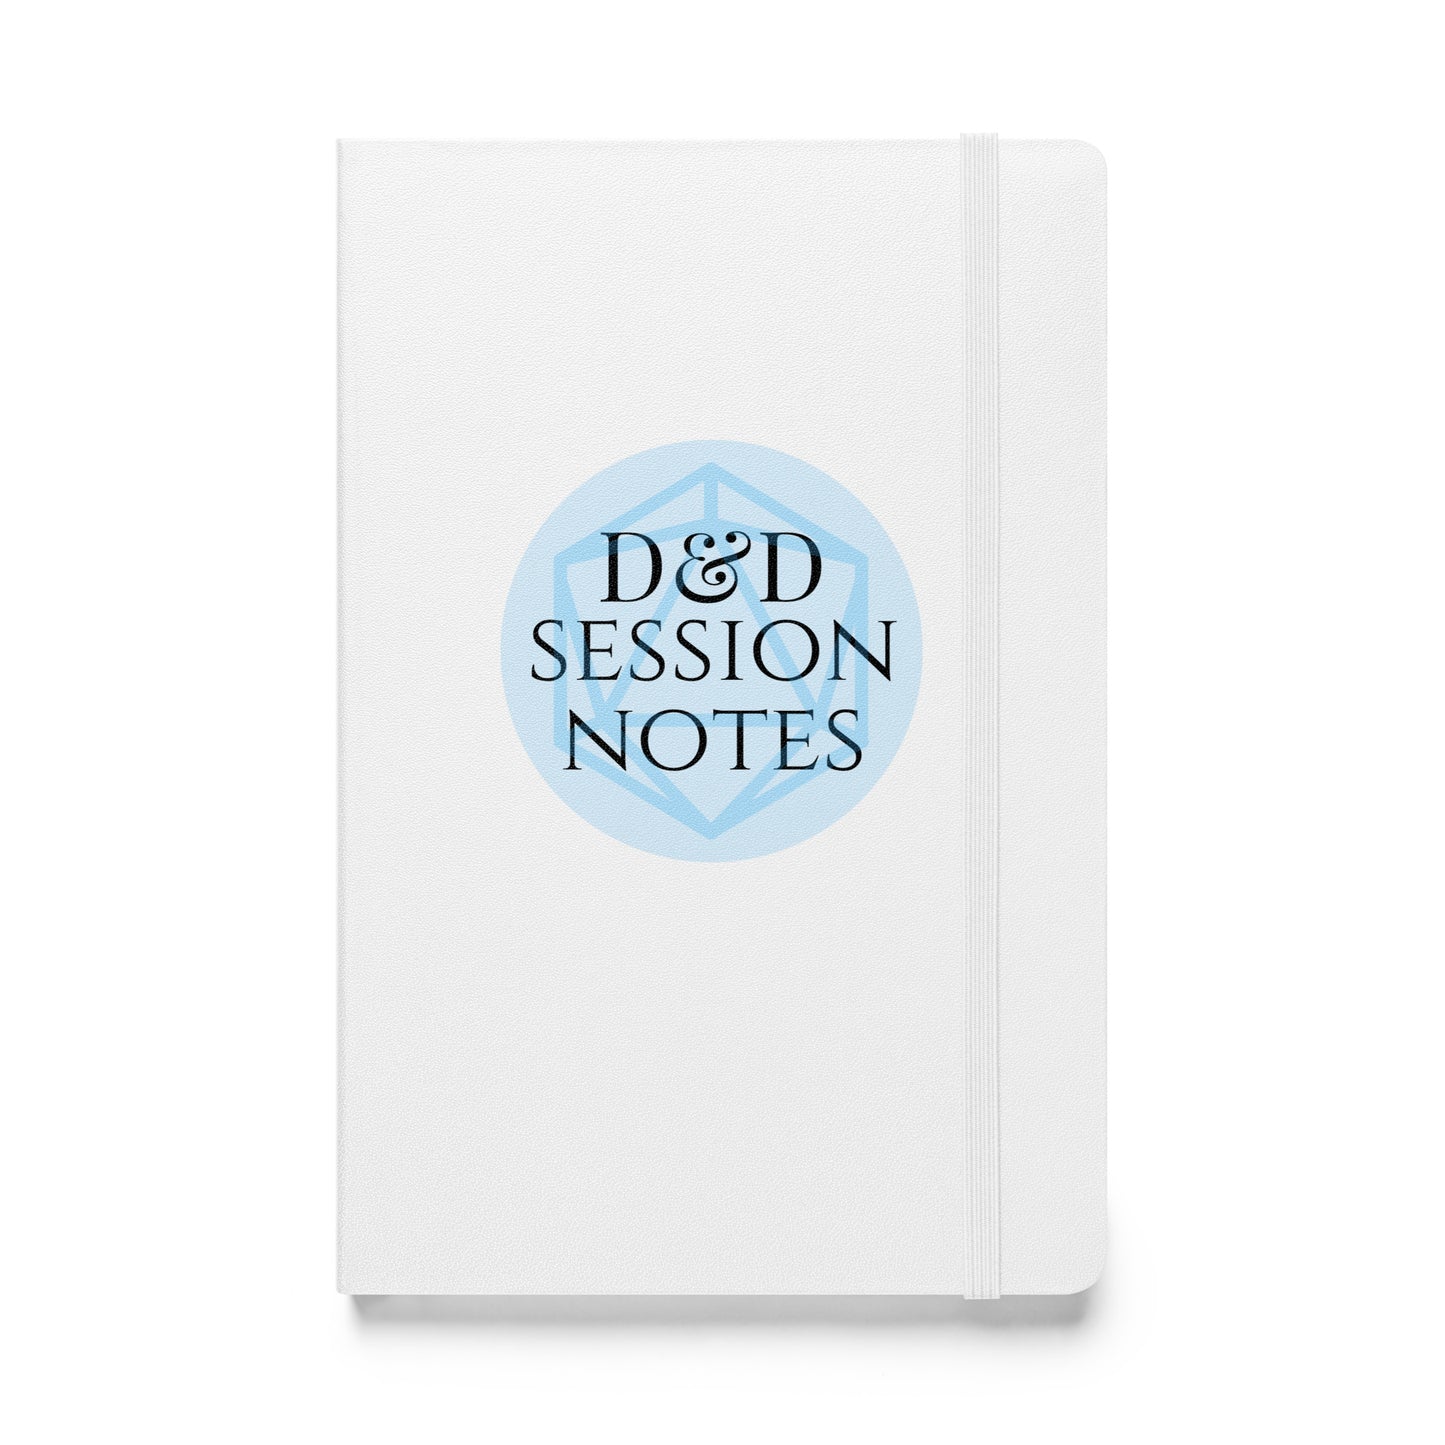 D&D Session Notes Hardcover Bound Notebook